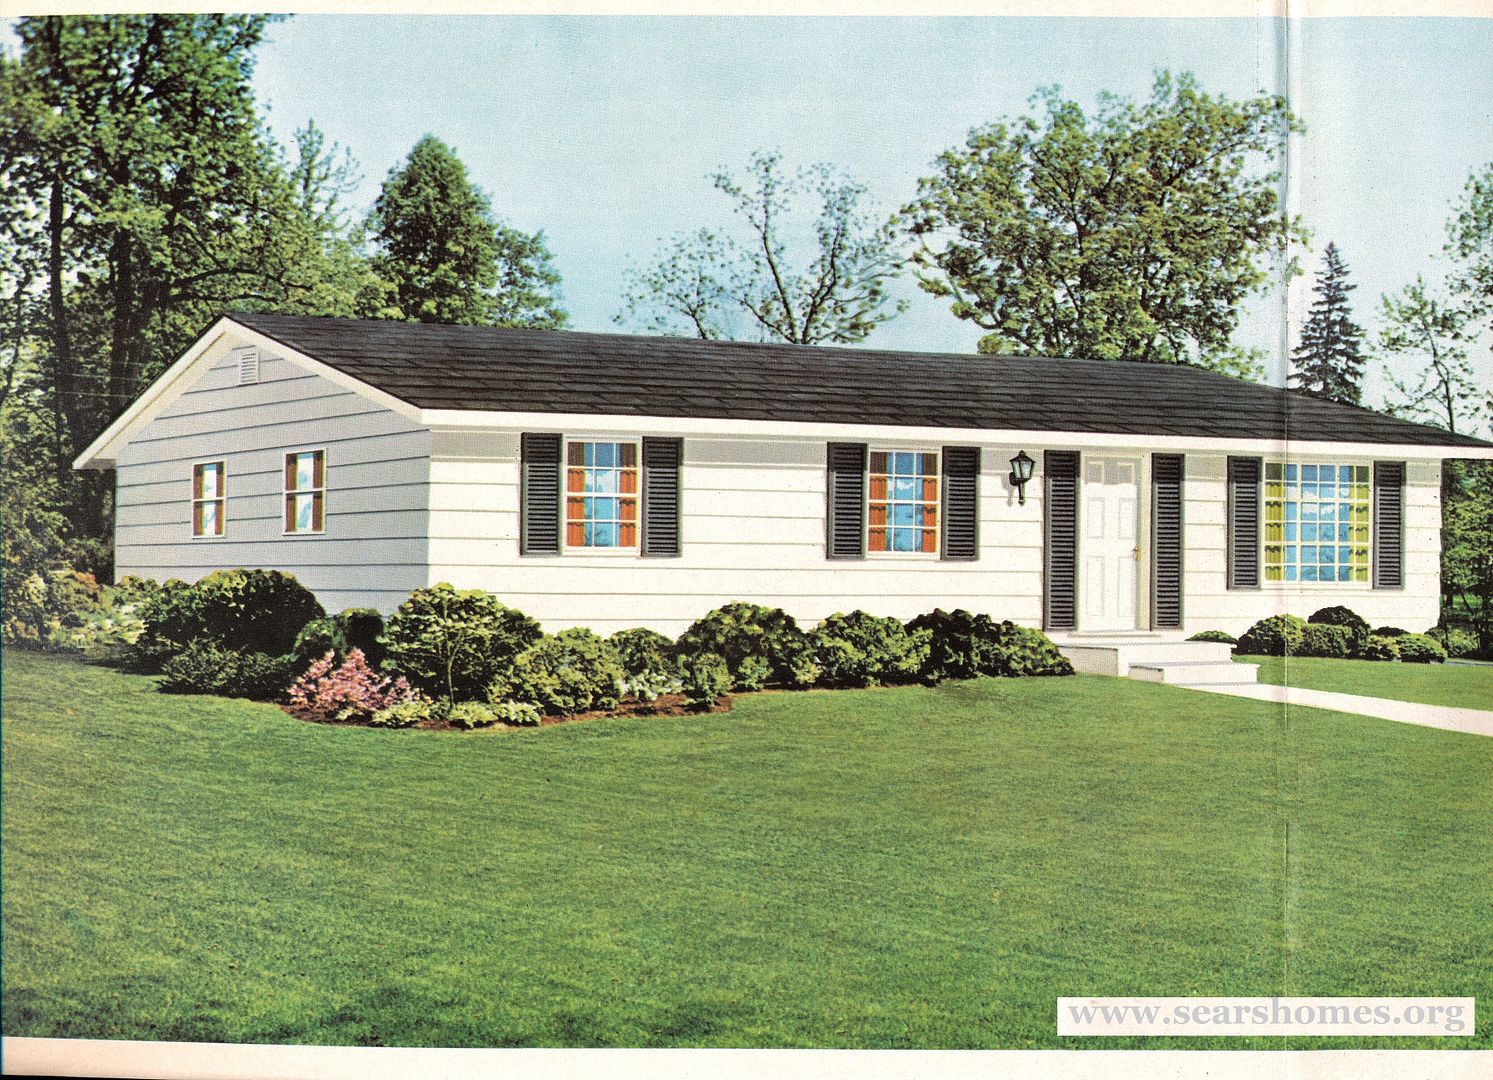 This house got a full-page spread. 